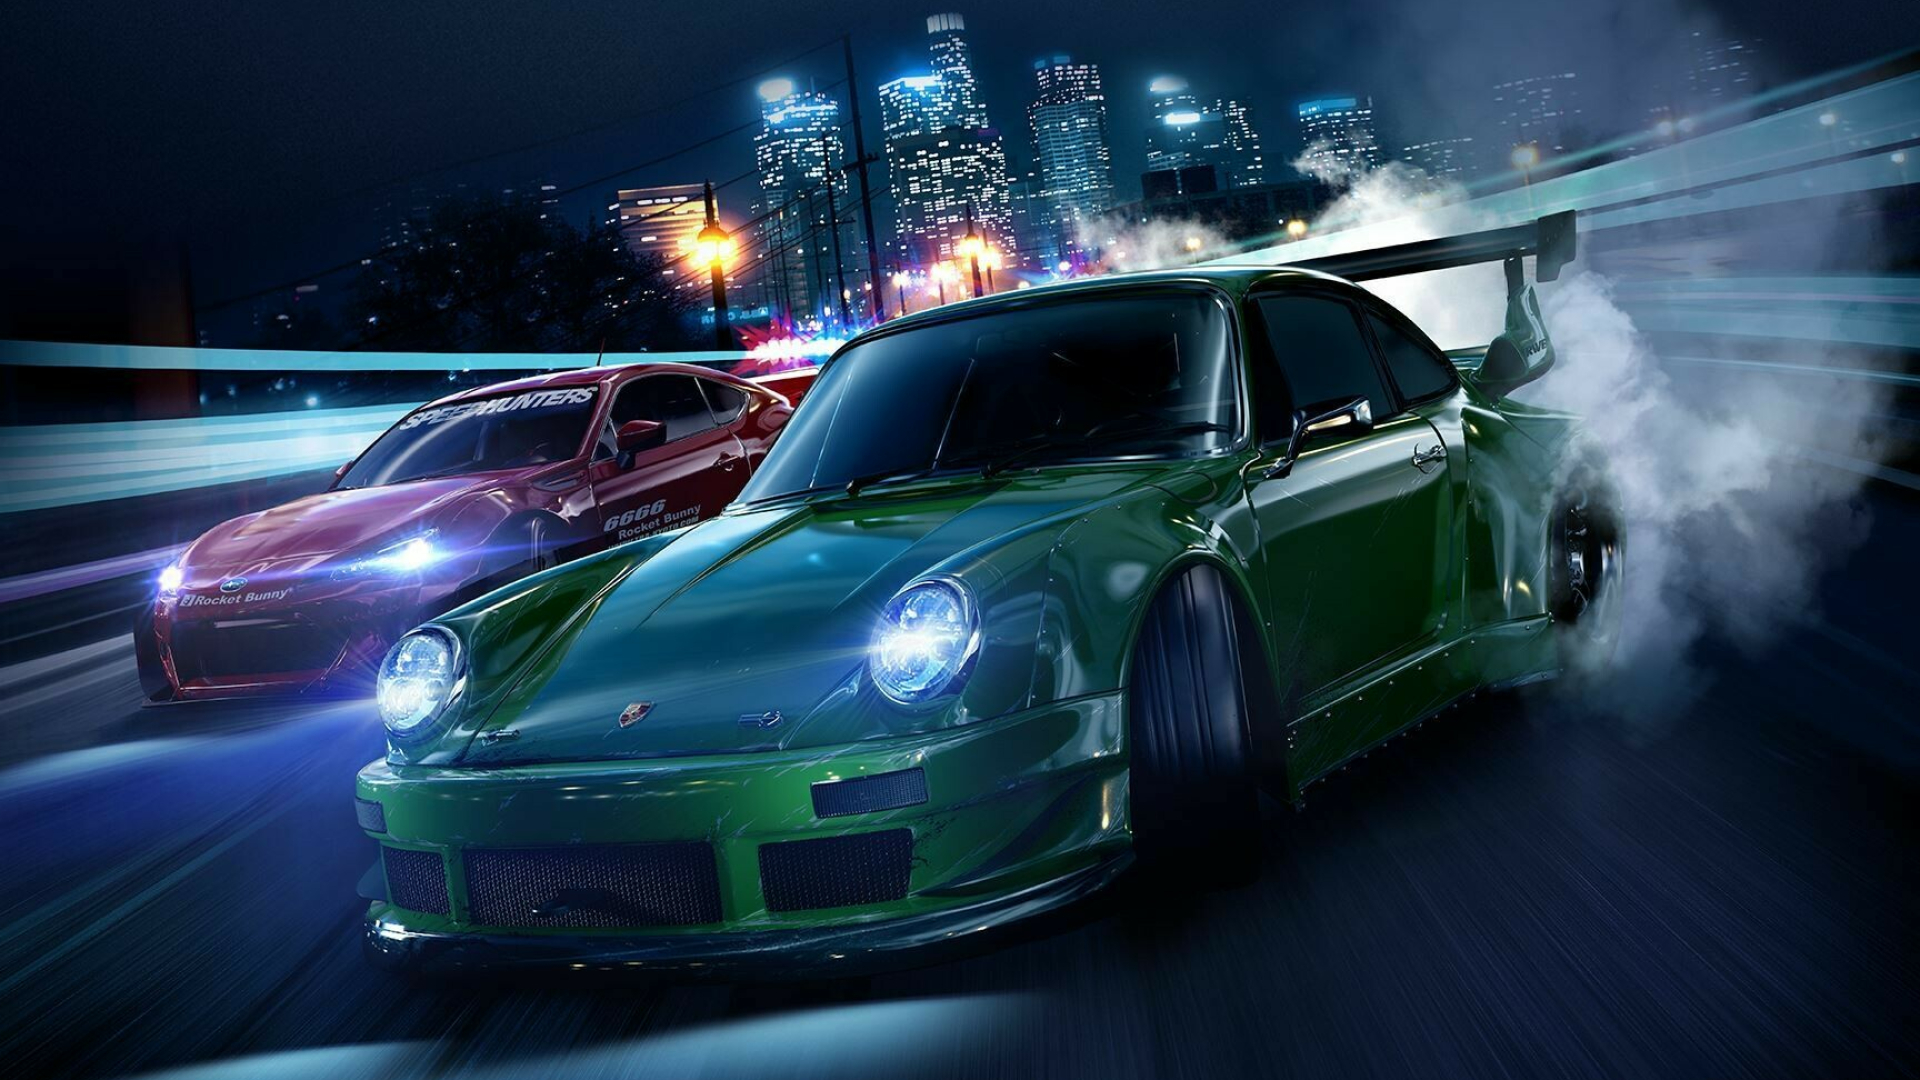 Need for Speed: NFS, Racing game, published by Electronic Arts. 1920x1080 Full HD Background.